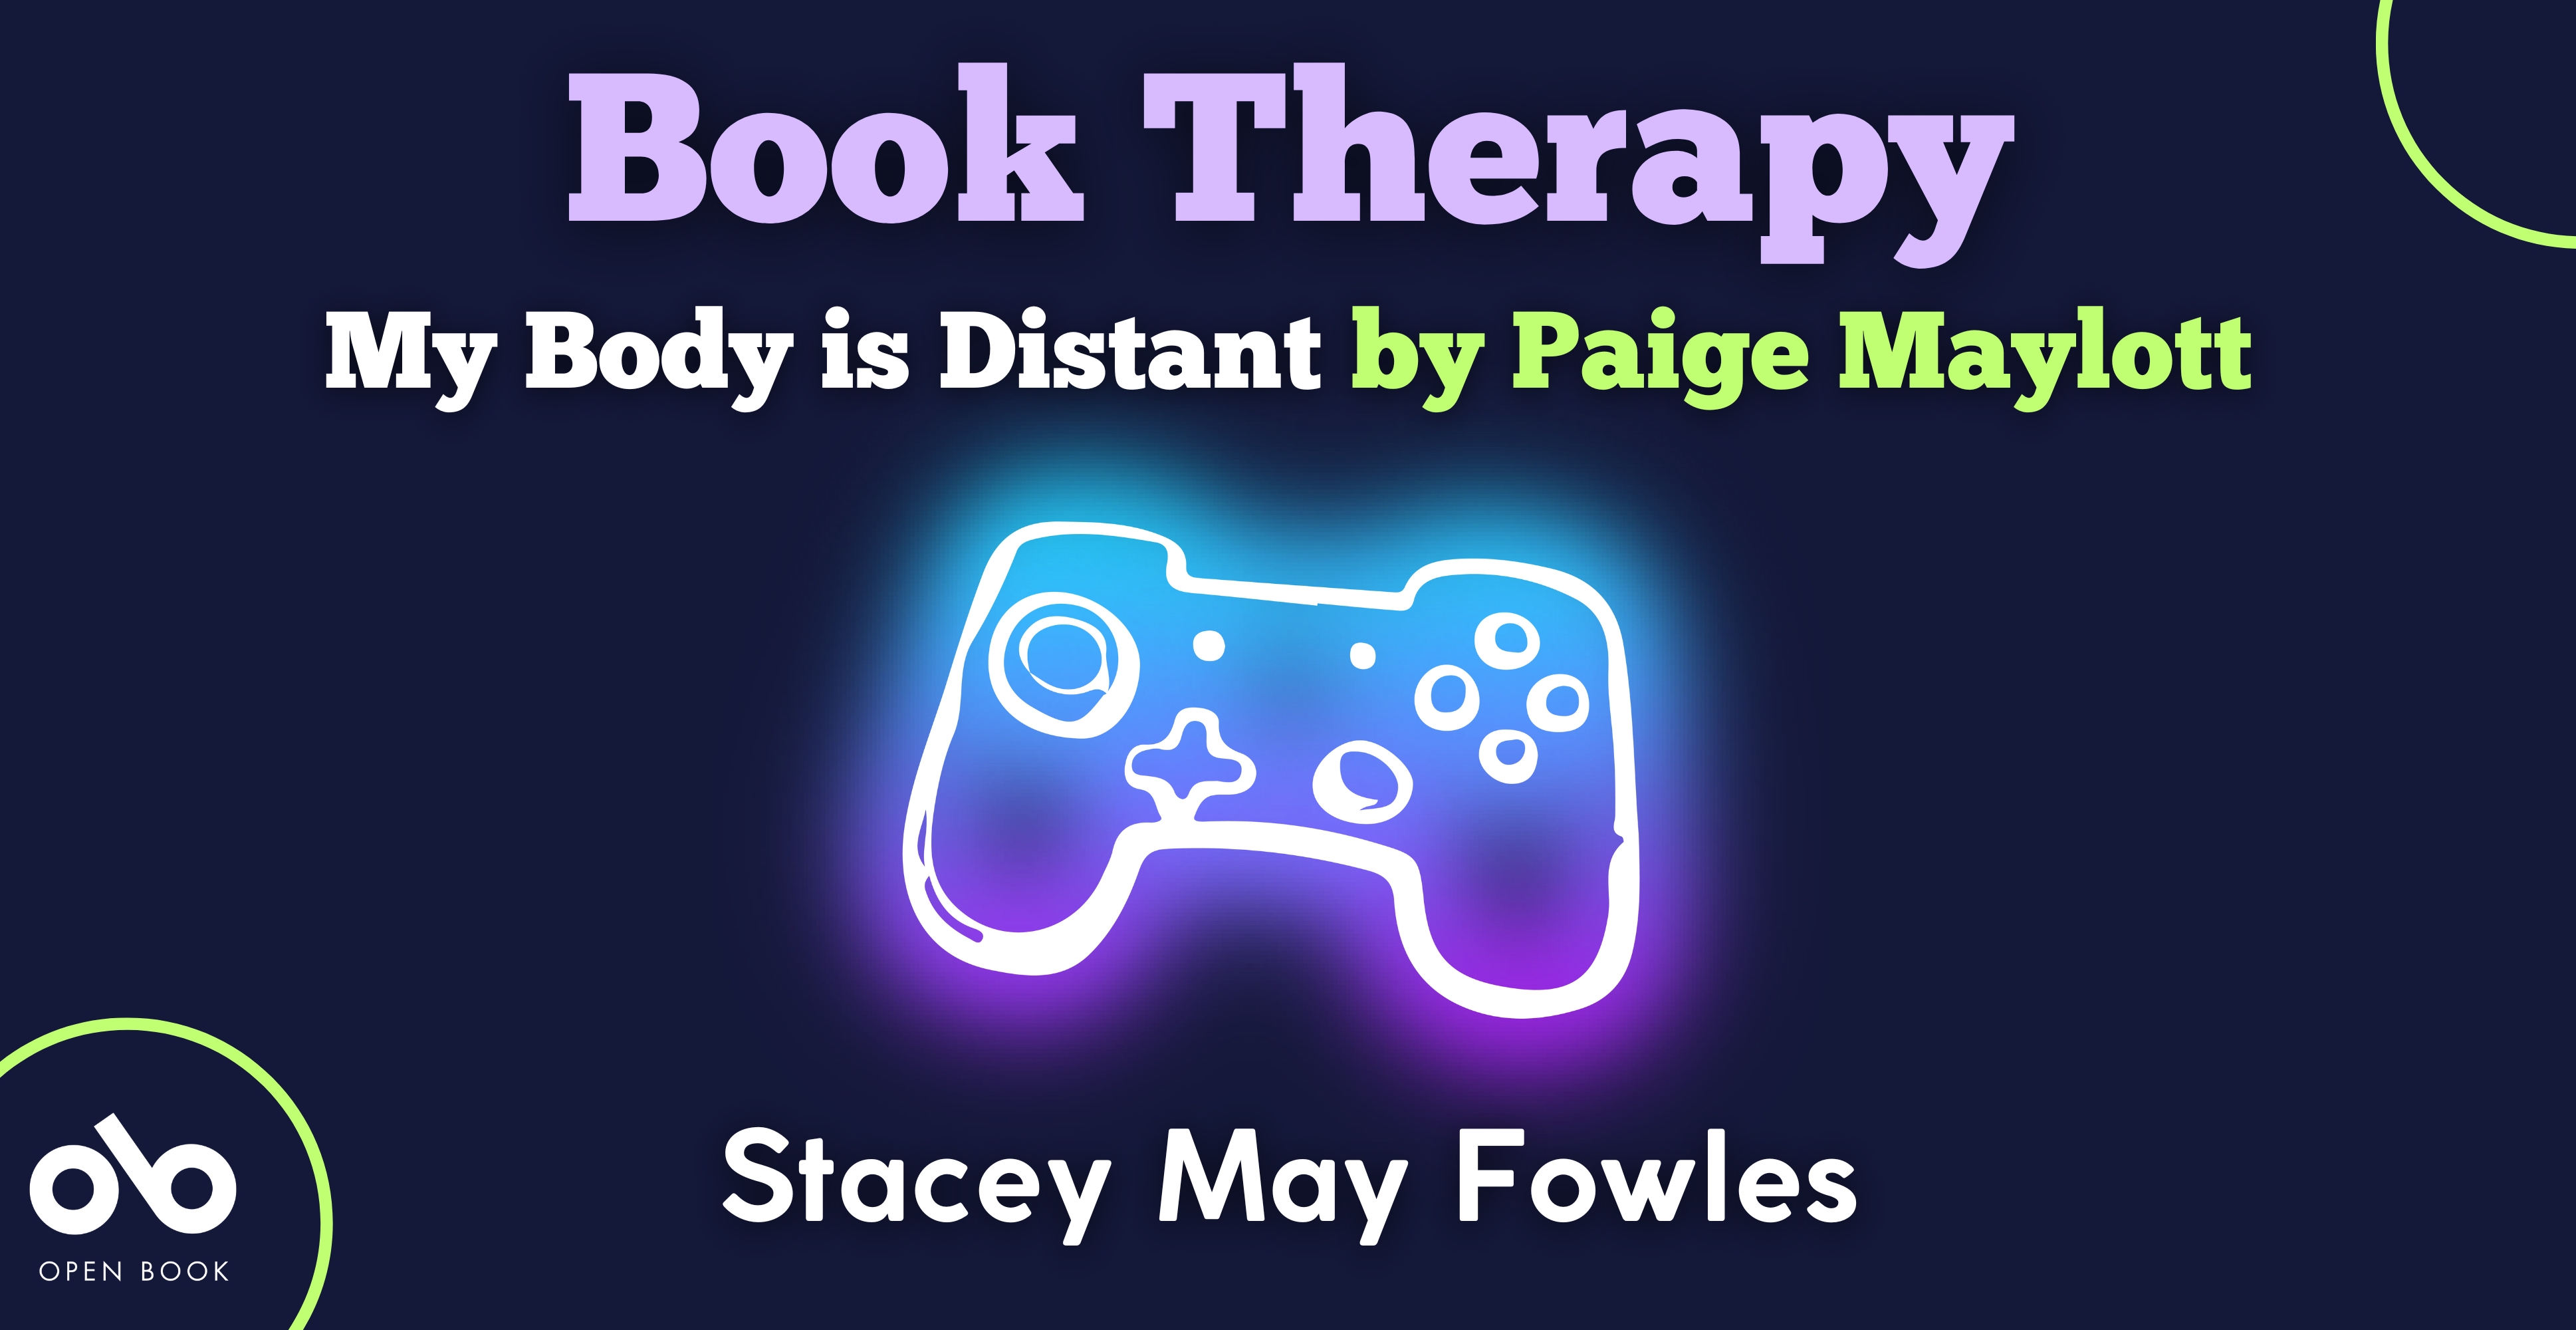 Book Therapy: My Body is Distant by Paige Maylott